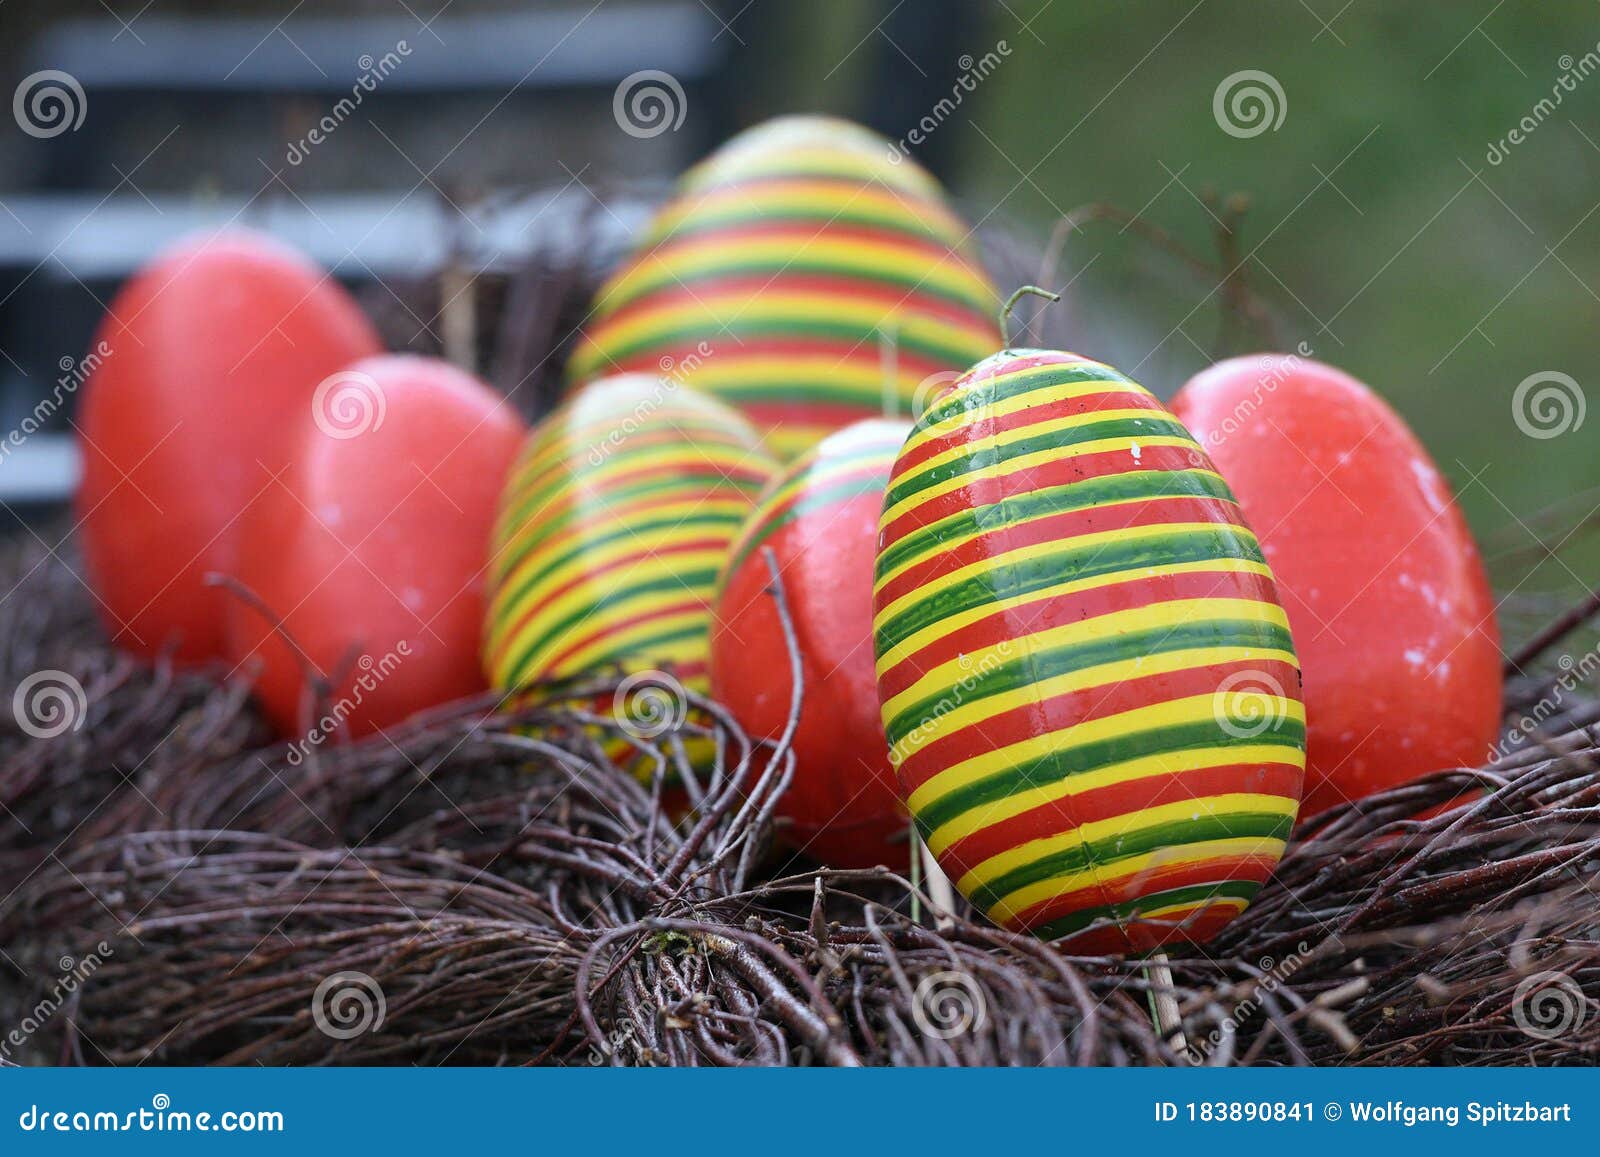 some easter eggs in austria